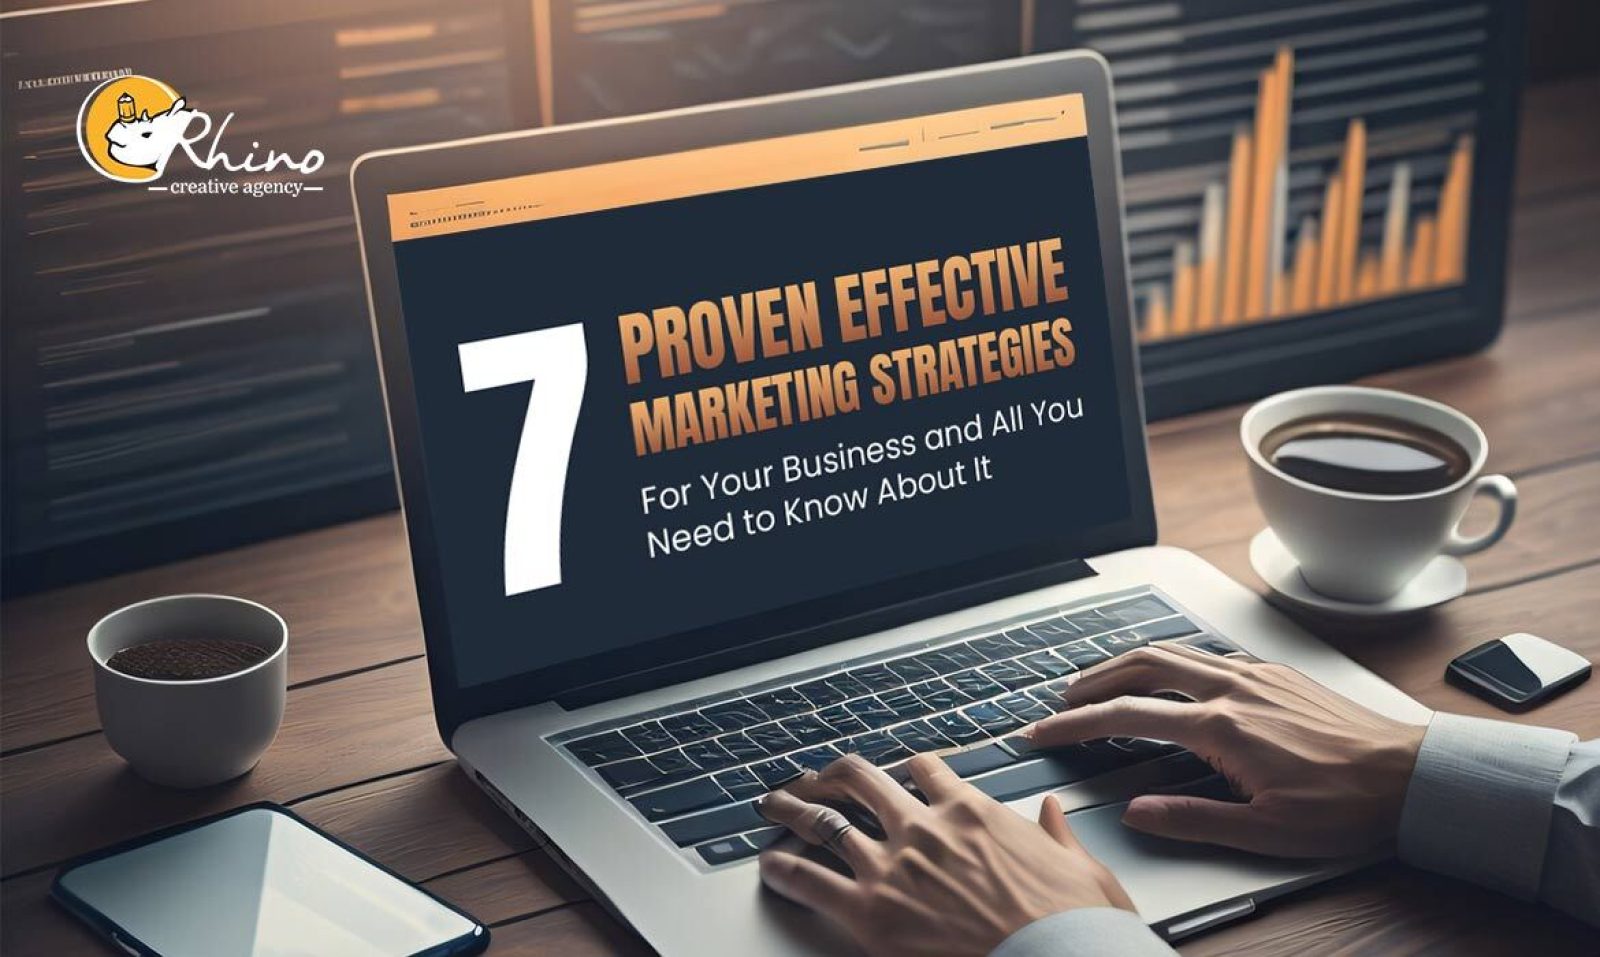 7 Proven Effective Marketing Strategies for Your Business